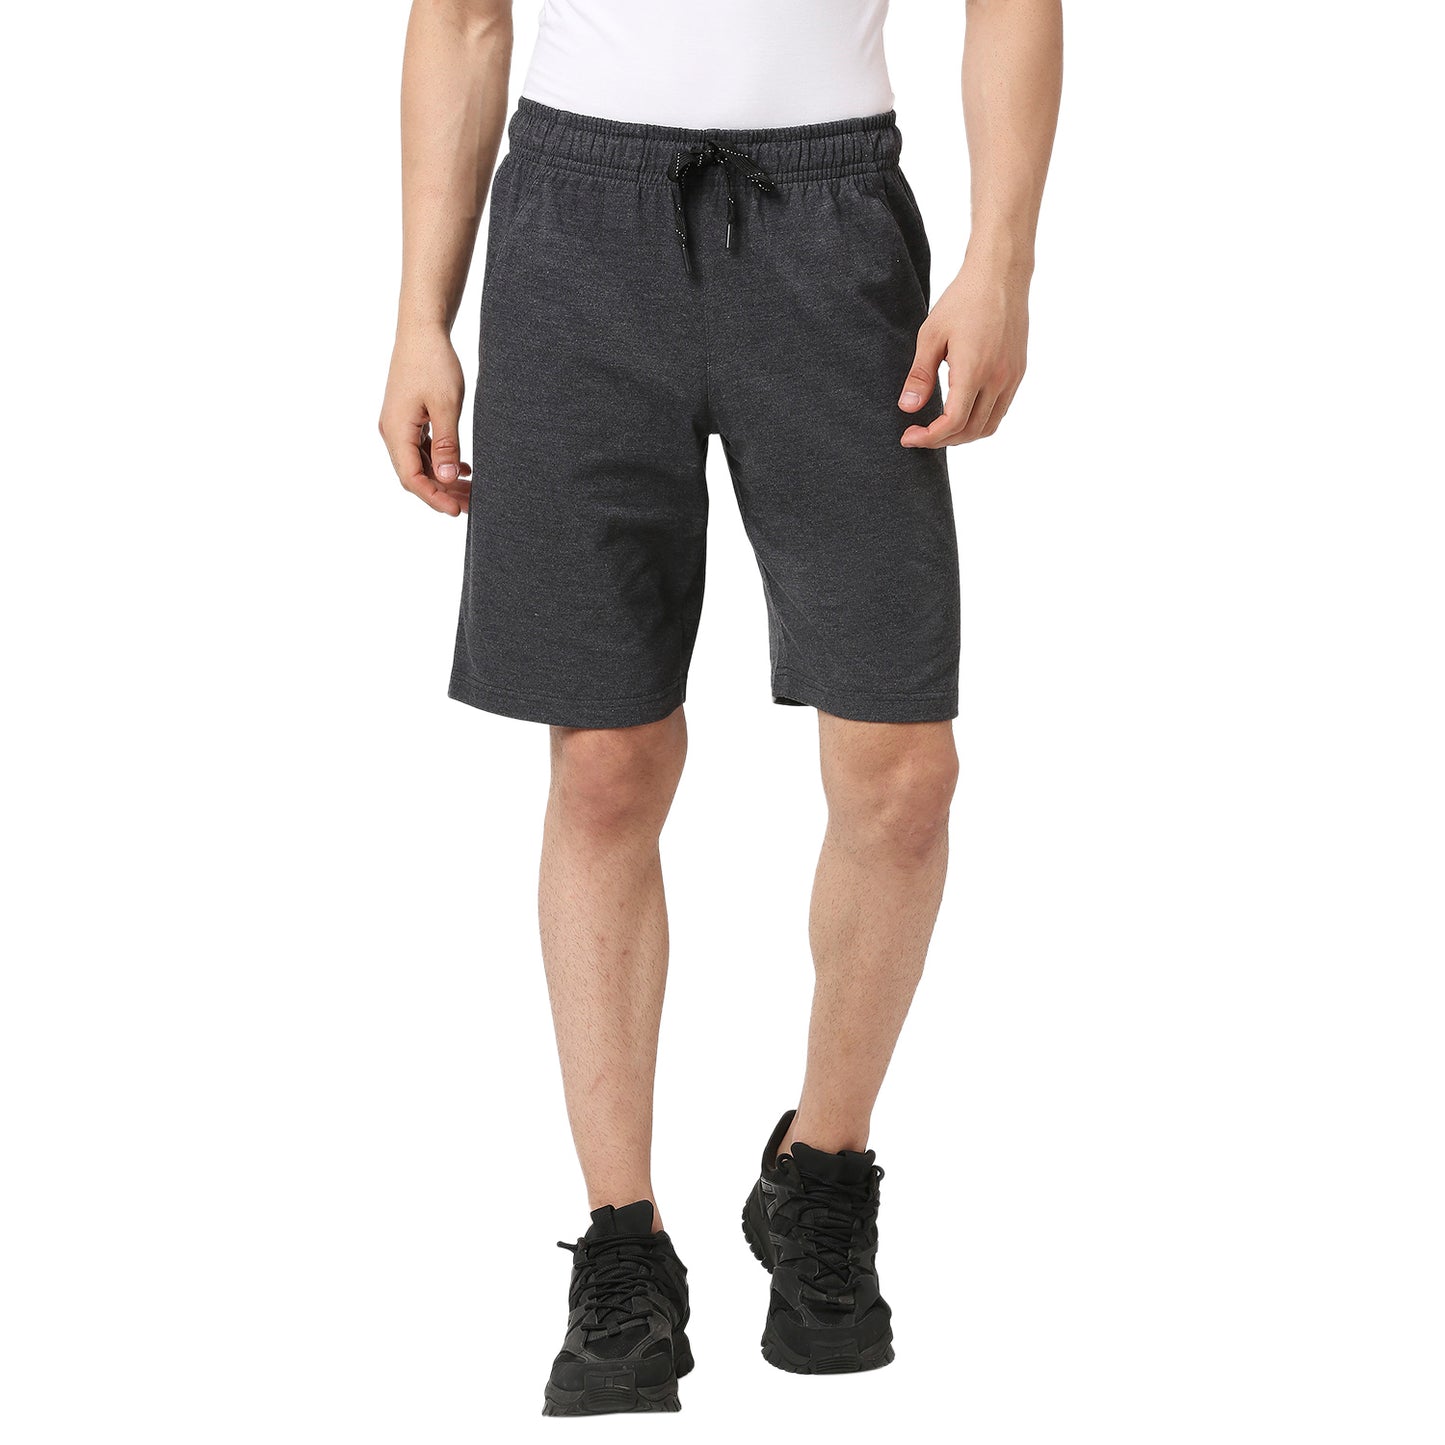 The Everyday Essentials Lounge Shorts